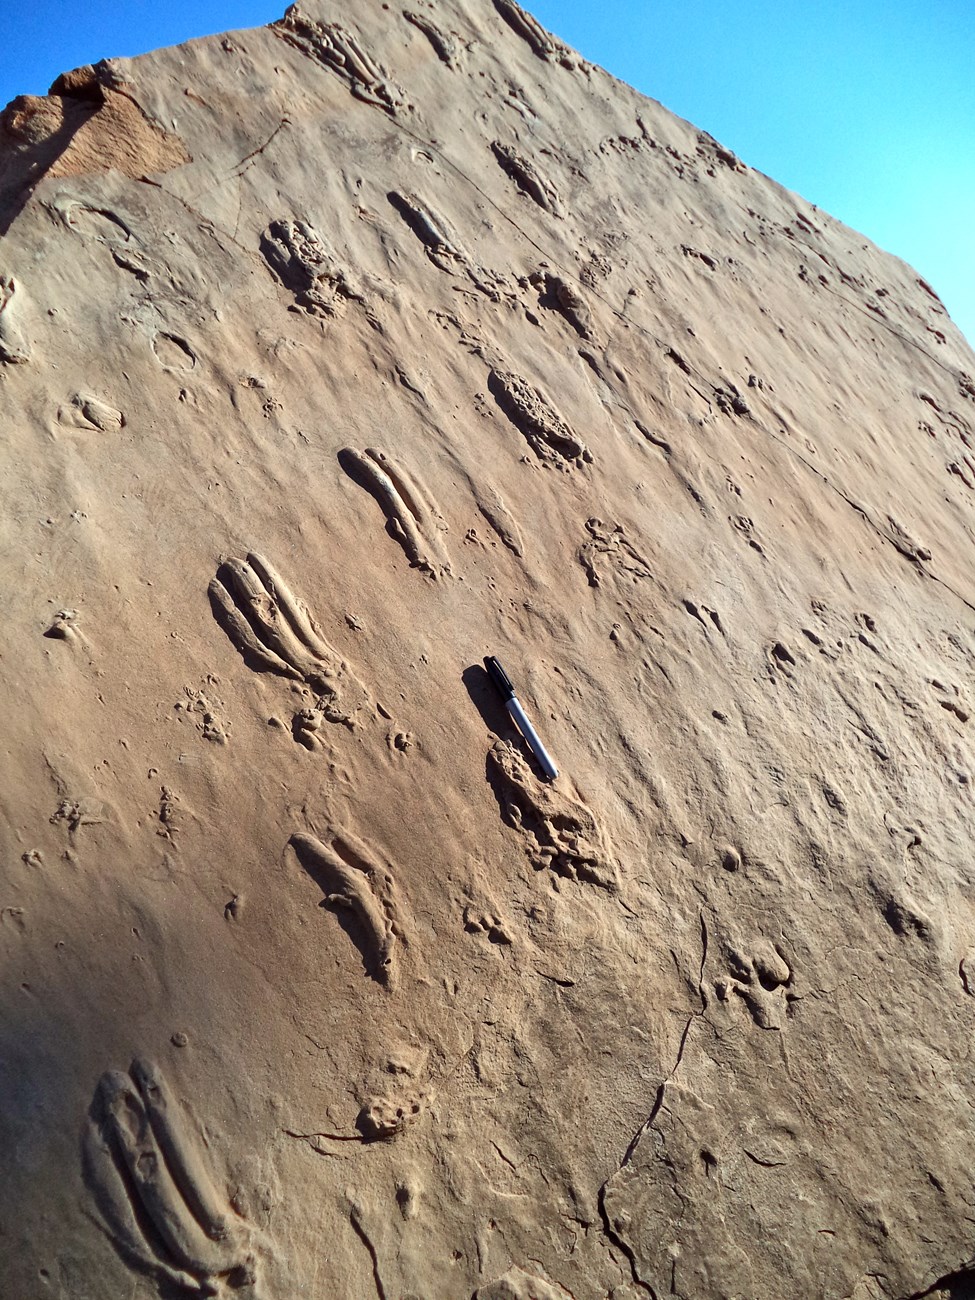 Raised tracks of three-toed animal in pale brown rock, with blue sky above and permanent marker for scale.